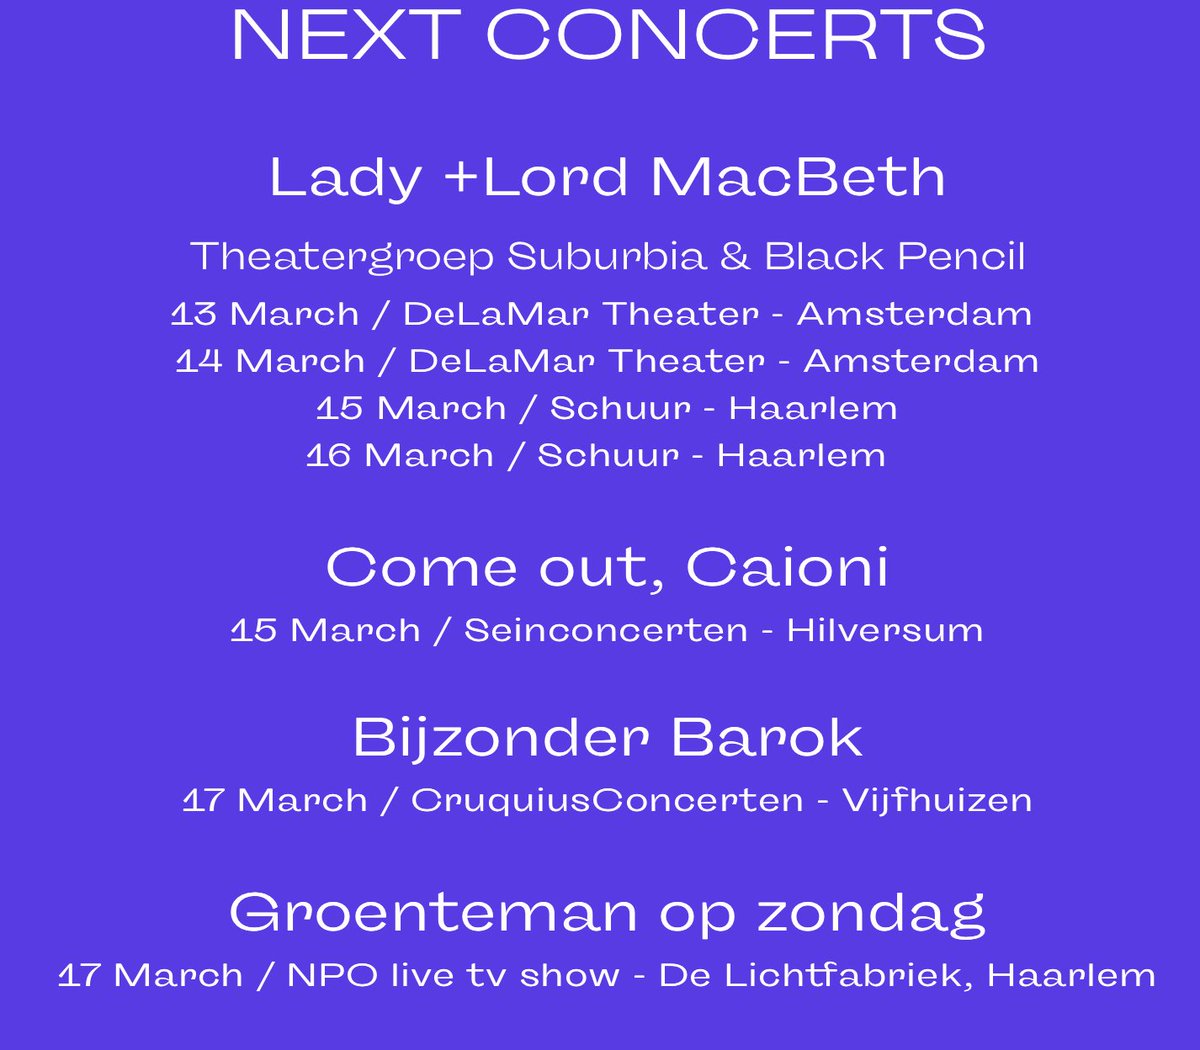 Busy week ahead! From tomorrow until Sunday we'll present 6 performances: Lady+Lord MacBeth with @tgsuburbia, concerts at @Seinconcerten1 and Cruquius Concerten, live broadcast on the TV show Groenteman op zondag on @NPO2 with Gijs Groenteman. Let's go!